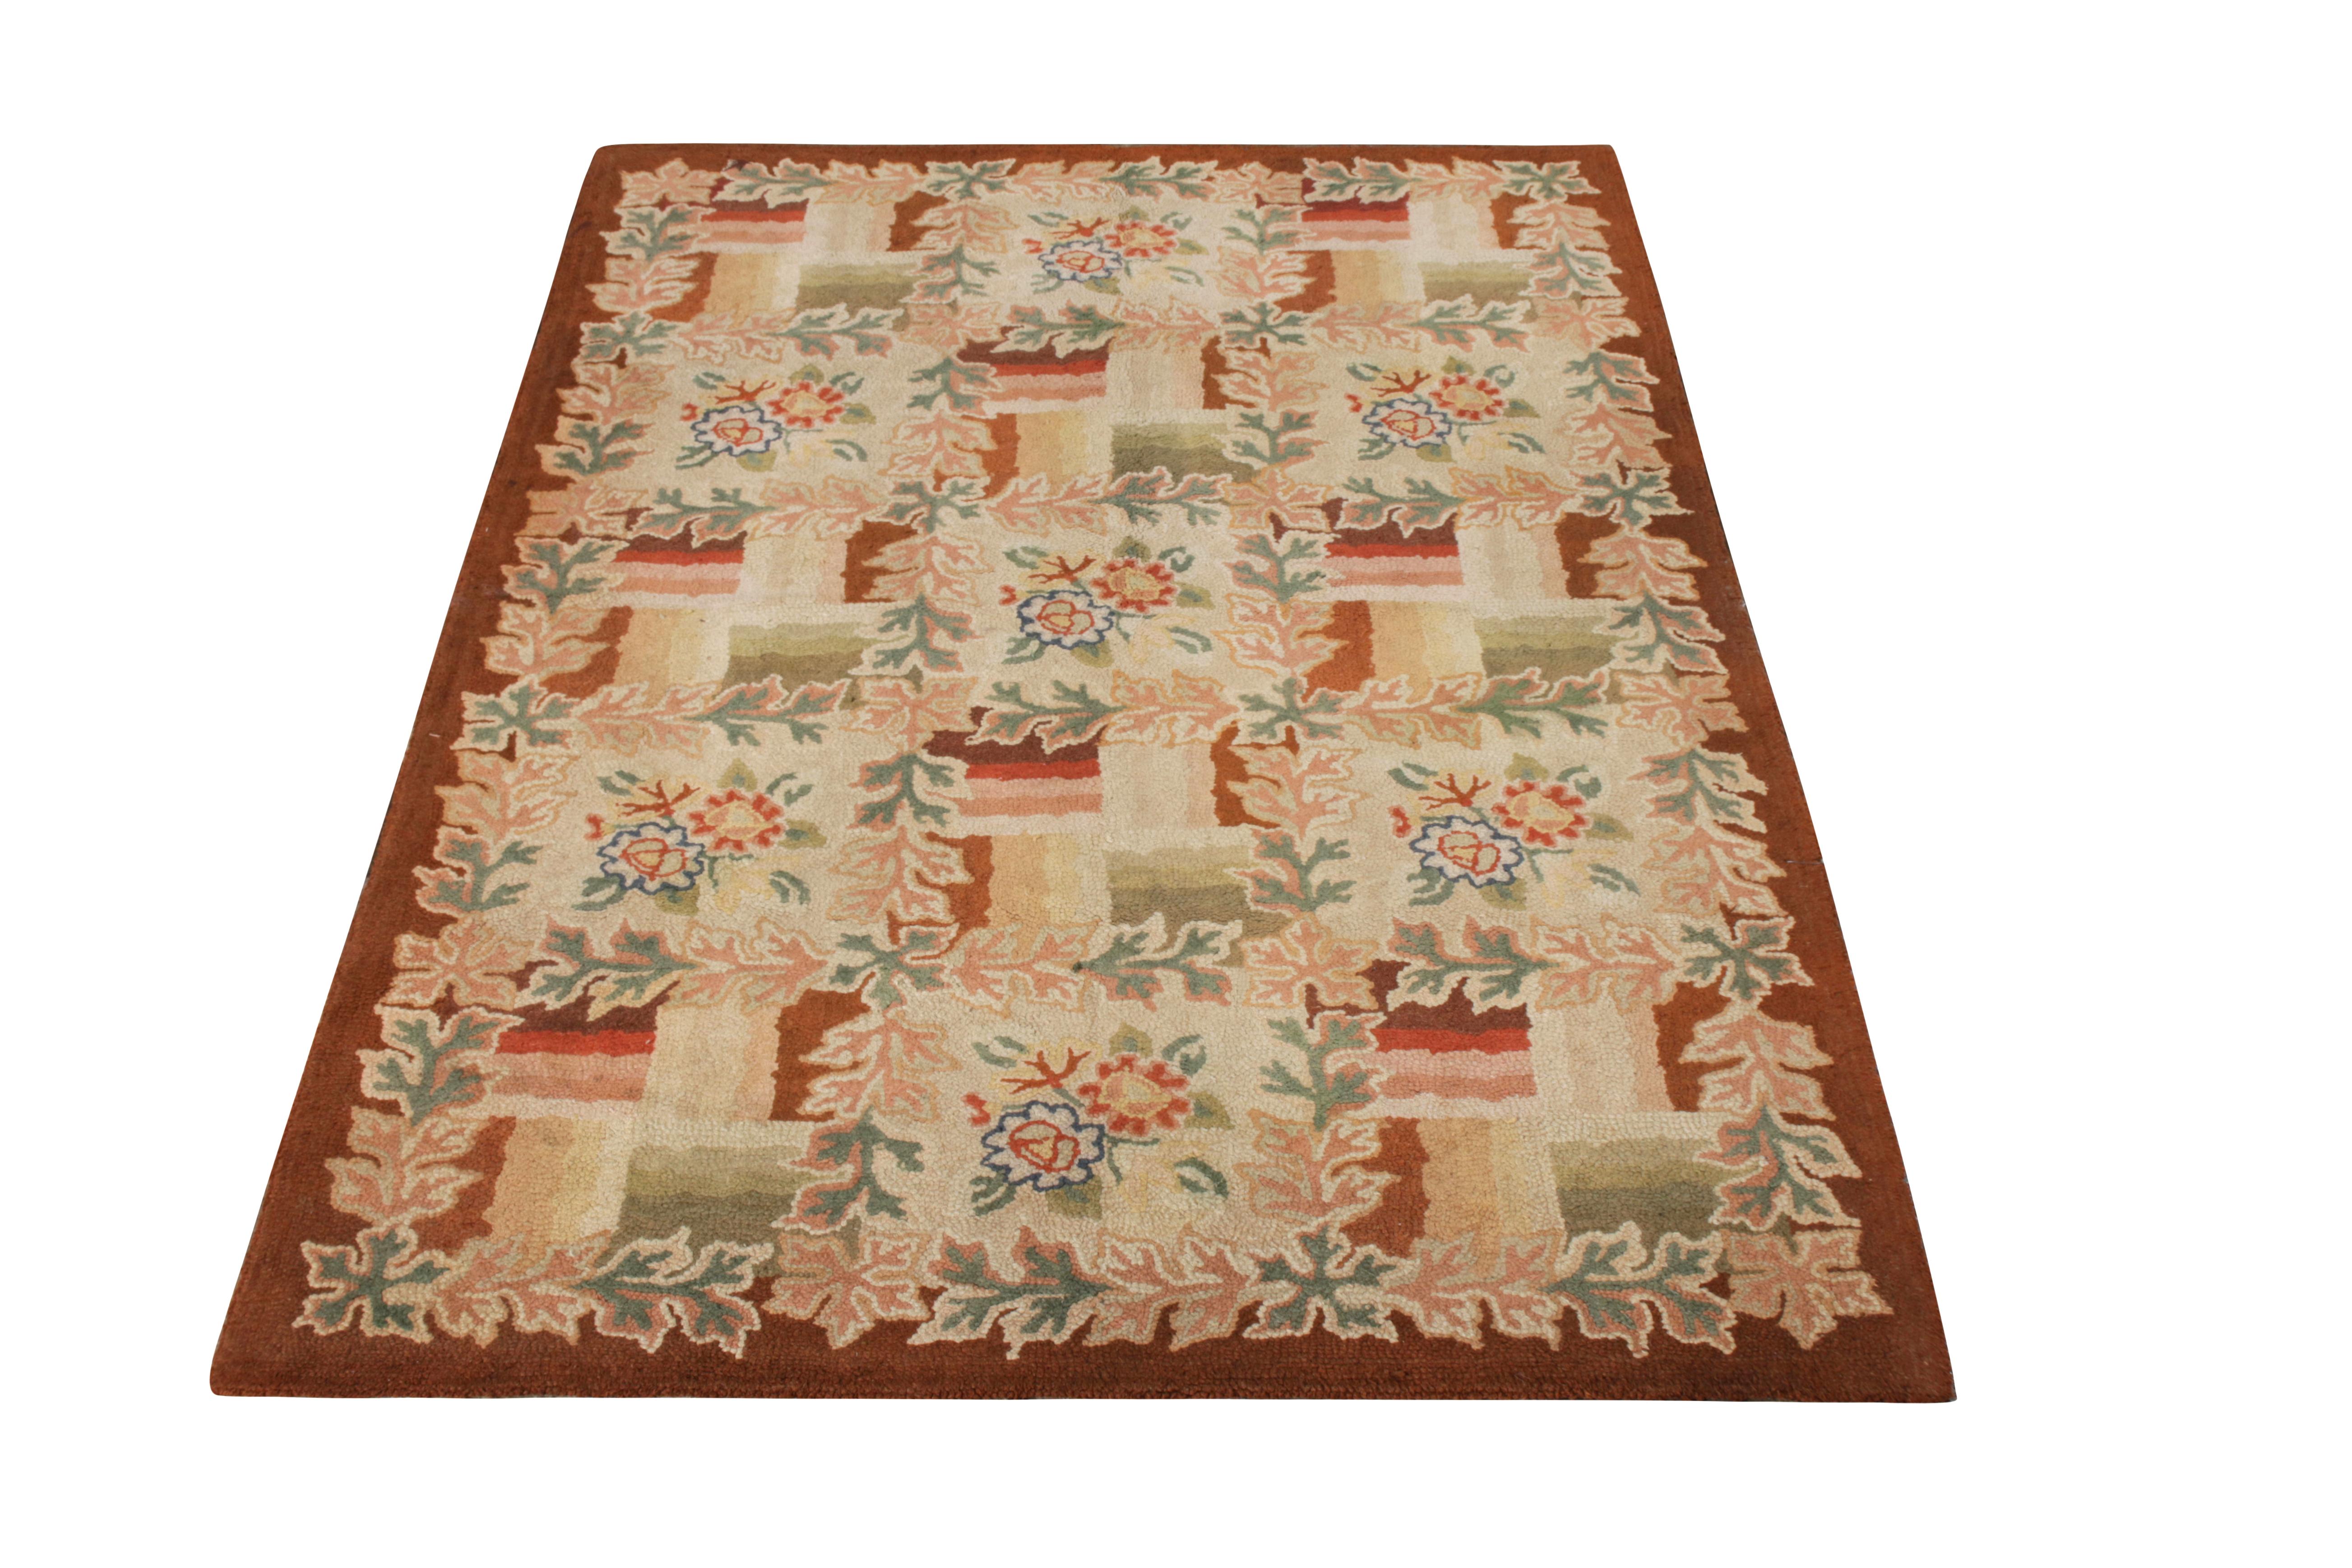 Originating from the United States in the 1950s, this vintage floral rug hails from a premier collection of hand hooked wool carpets, standing out for its use of rich and varied colorways and its sharp, lasting detail in pristine condition. The